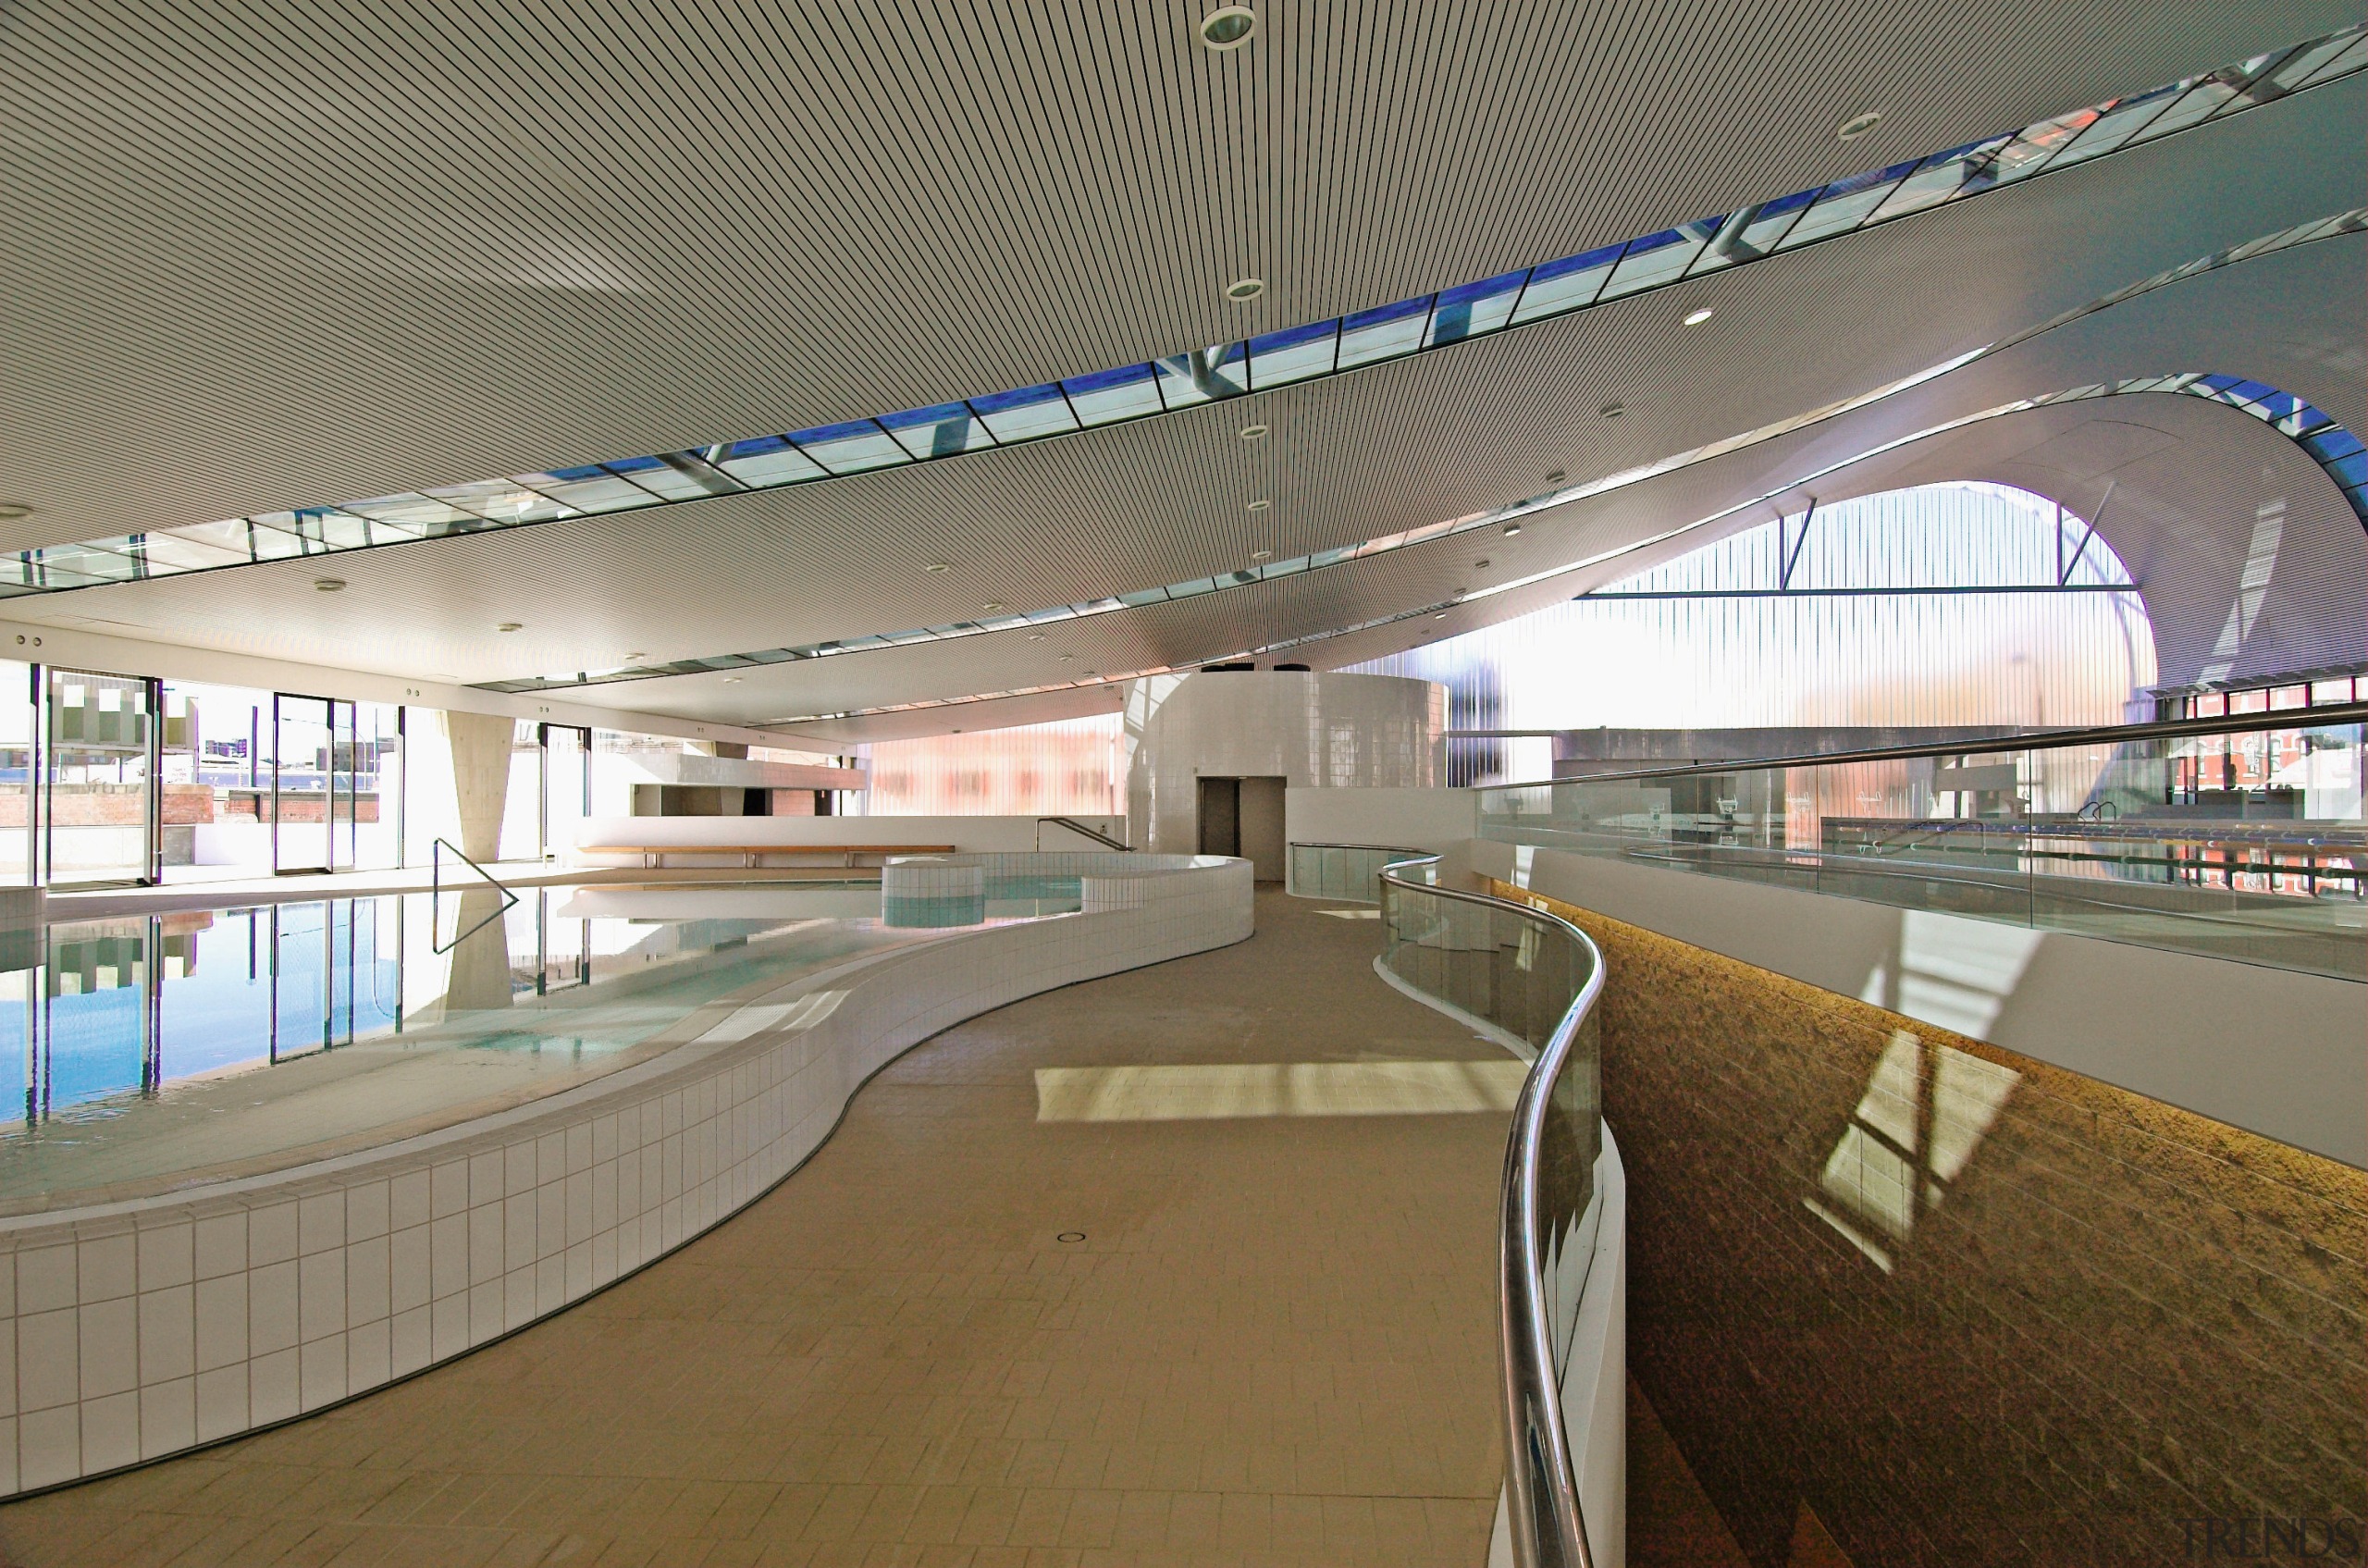 An interior view of the ian thorpe aquatic airport terminal, architecture, fixed link, infrastructure, leisure centre, metropolitan area, overpass, skyway, sport venue, structure, gray, brown